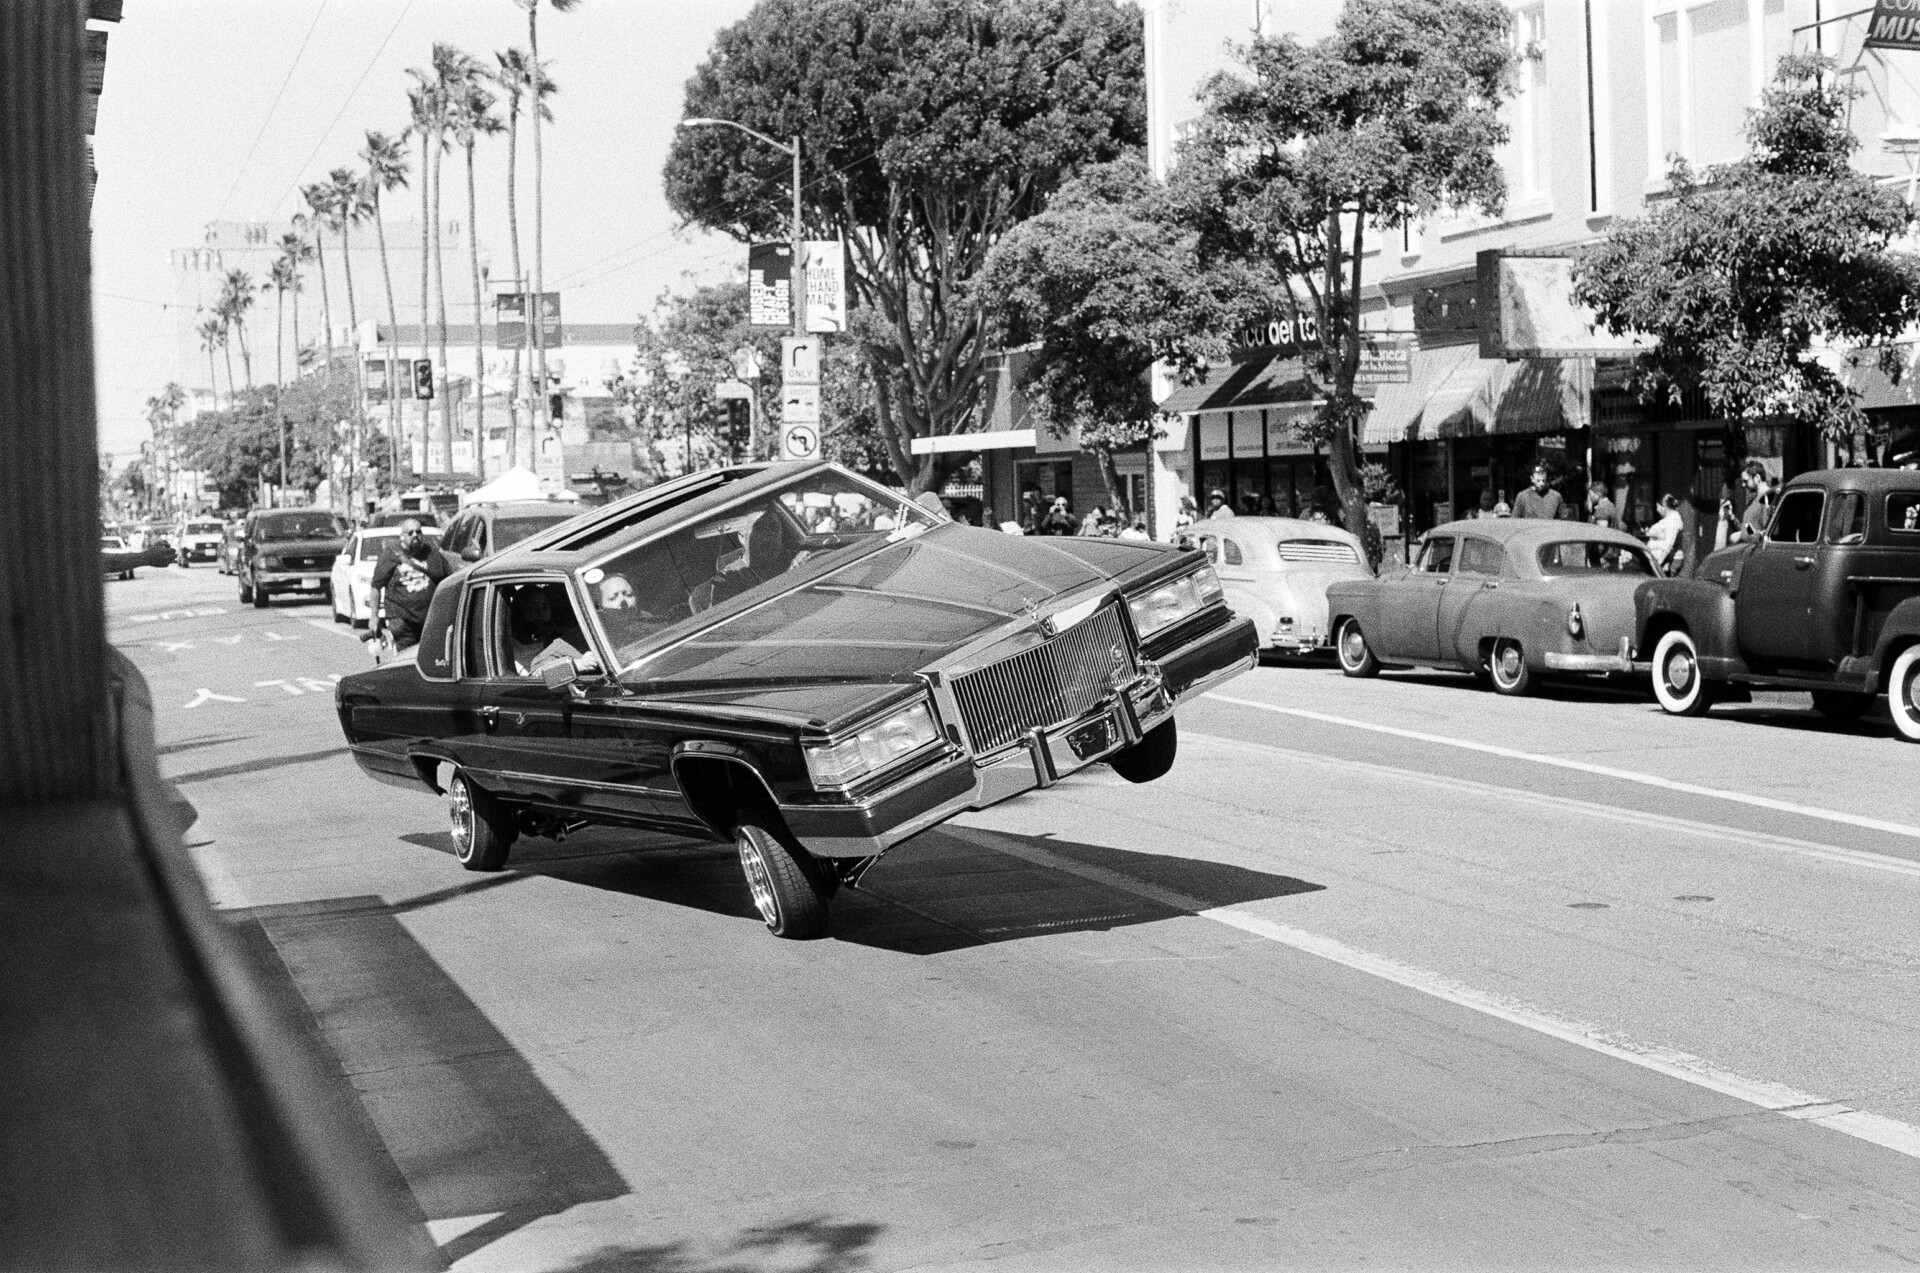 A lowrider shows off the hydraulic suspension capabilities of his car by leaning to the right on Mission Street.